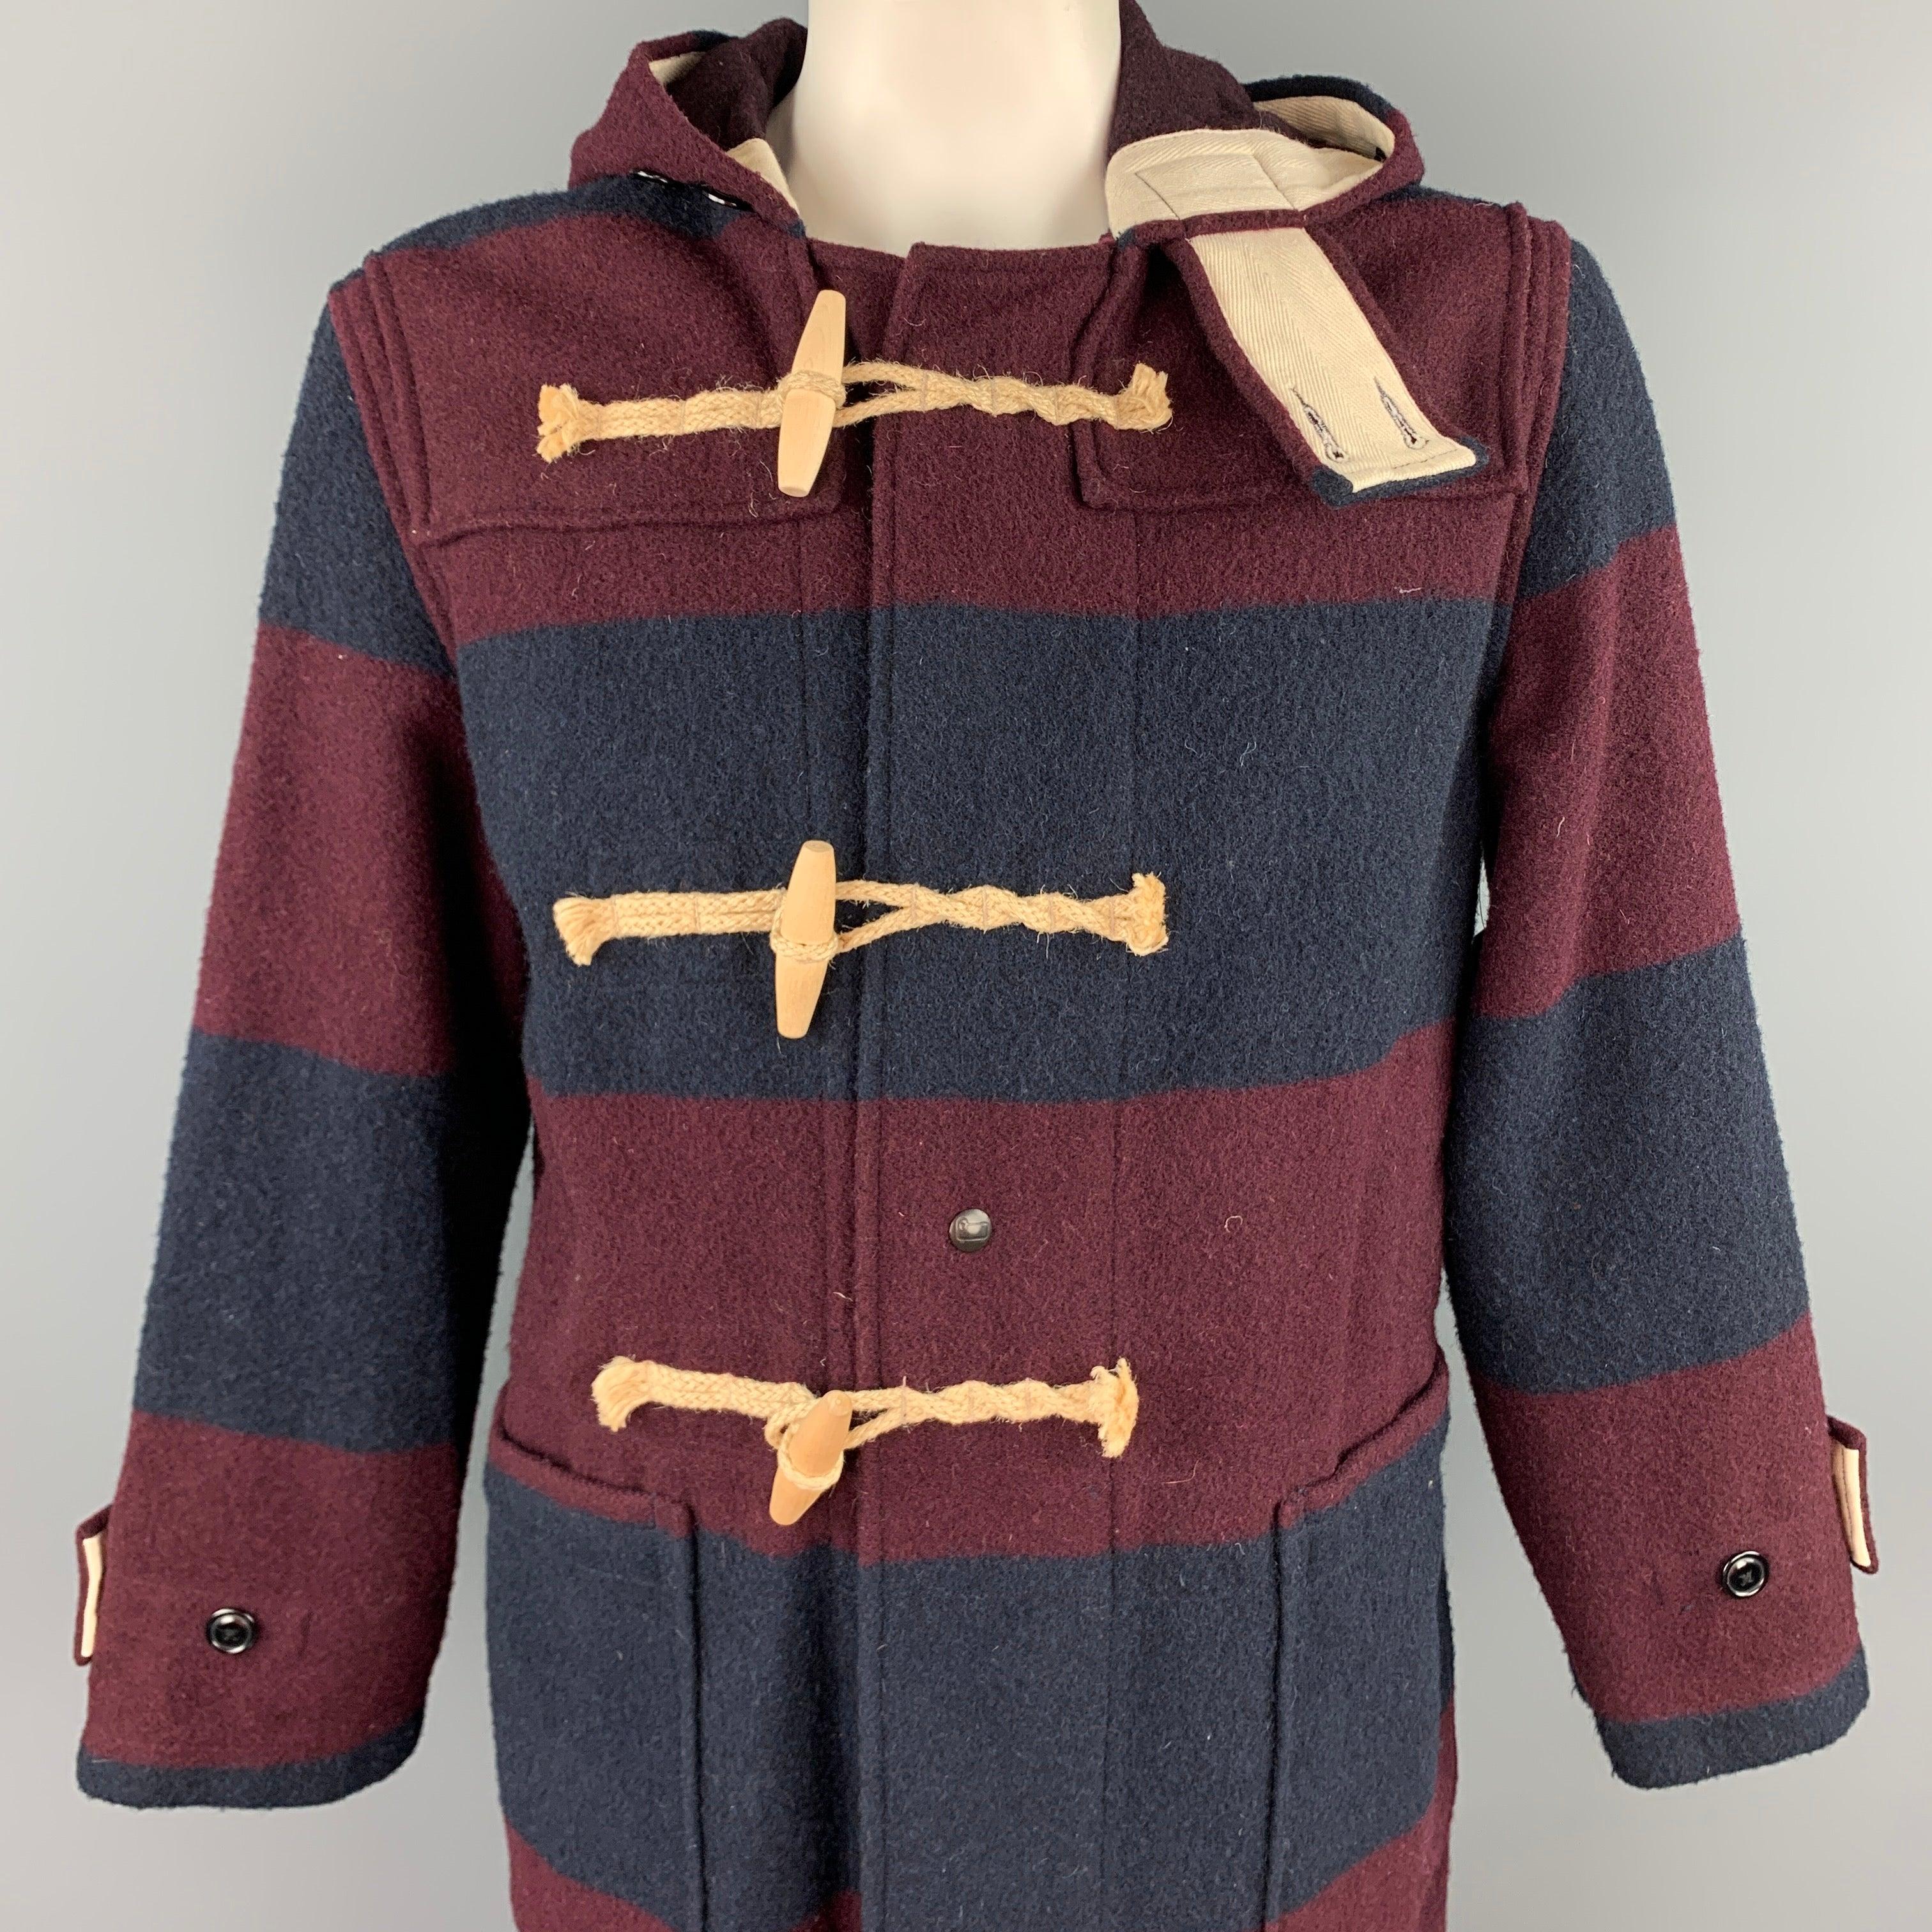 WOOLRICH coat comes i a burgundy & navy stripe wool / nylon featuring a hooded style, patch pockets, buttoned details, and a toggle closure. Made in USA.
Good
Pre-Owned Condition. 

Marked:  M 

Measurements: 
 
Shoulder: 20 inches Chest: 46 inches